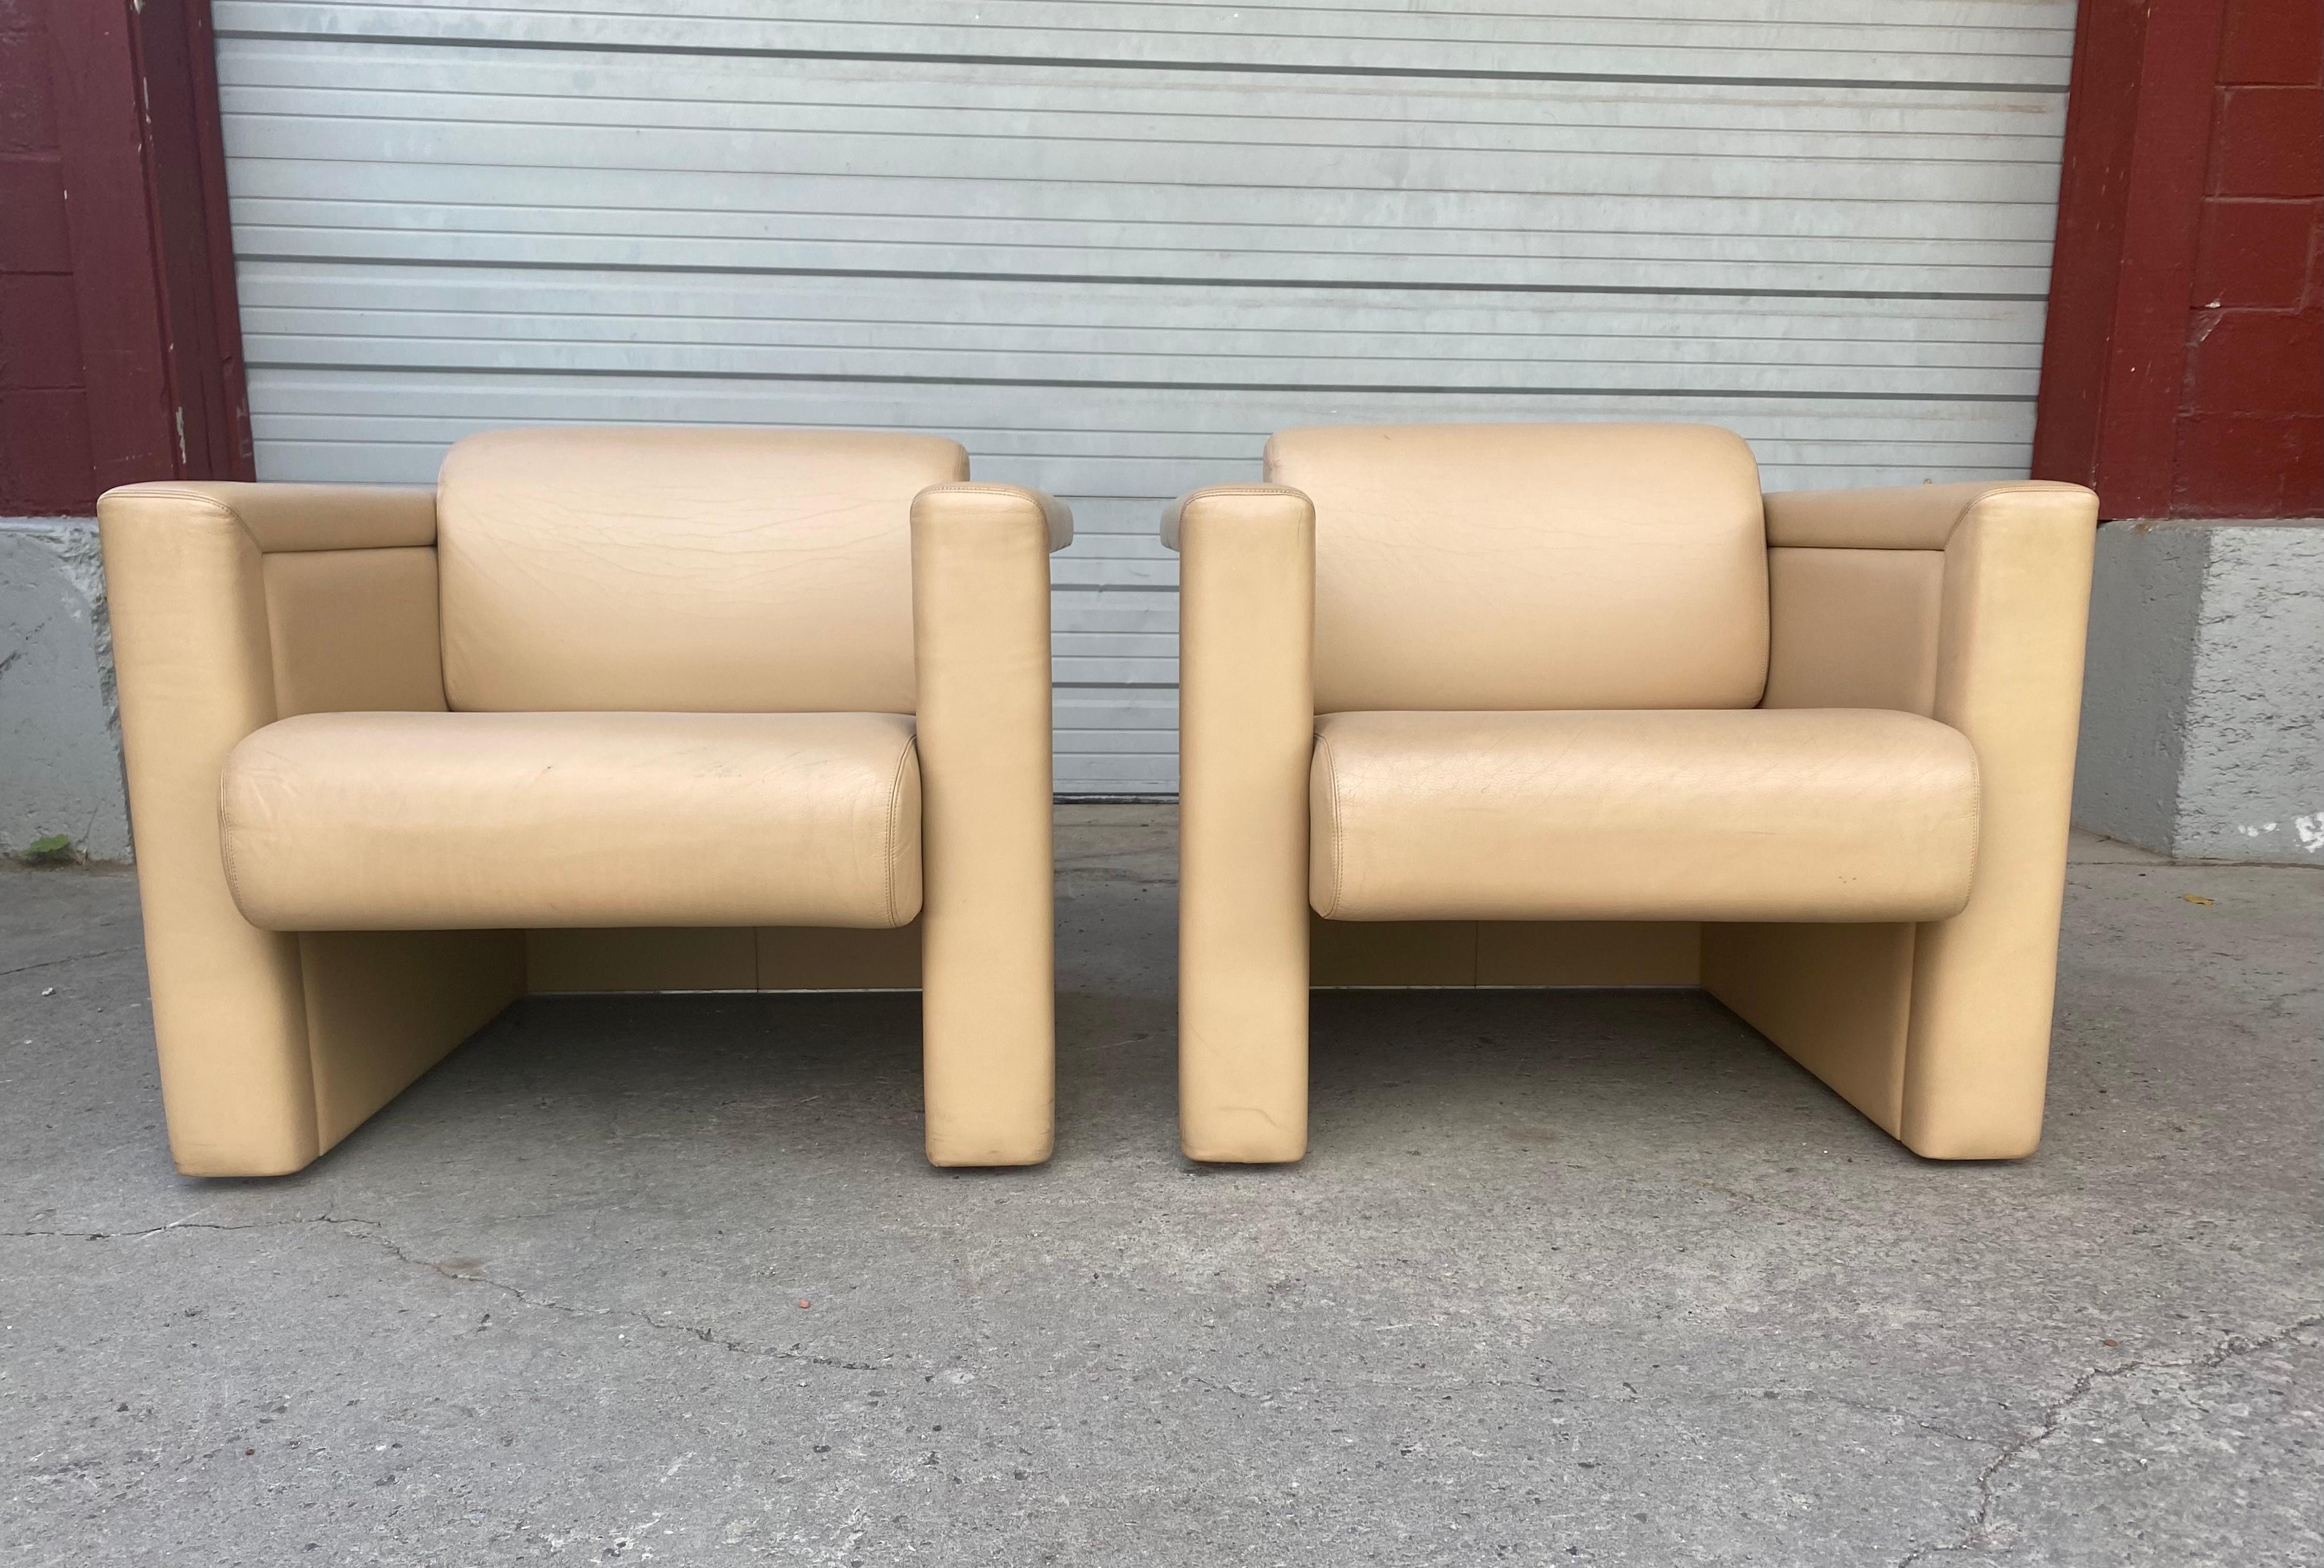 Stunning Pair Leather Chairs, Tobia Scarpa for Knoll, Made in Italy In Good Condition For Sale In Buffalo, NY